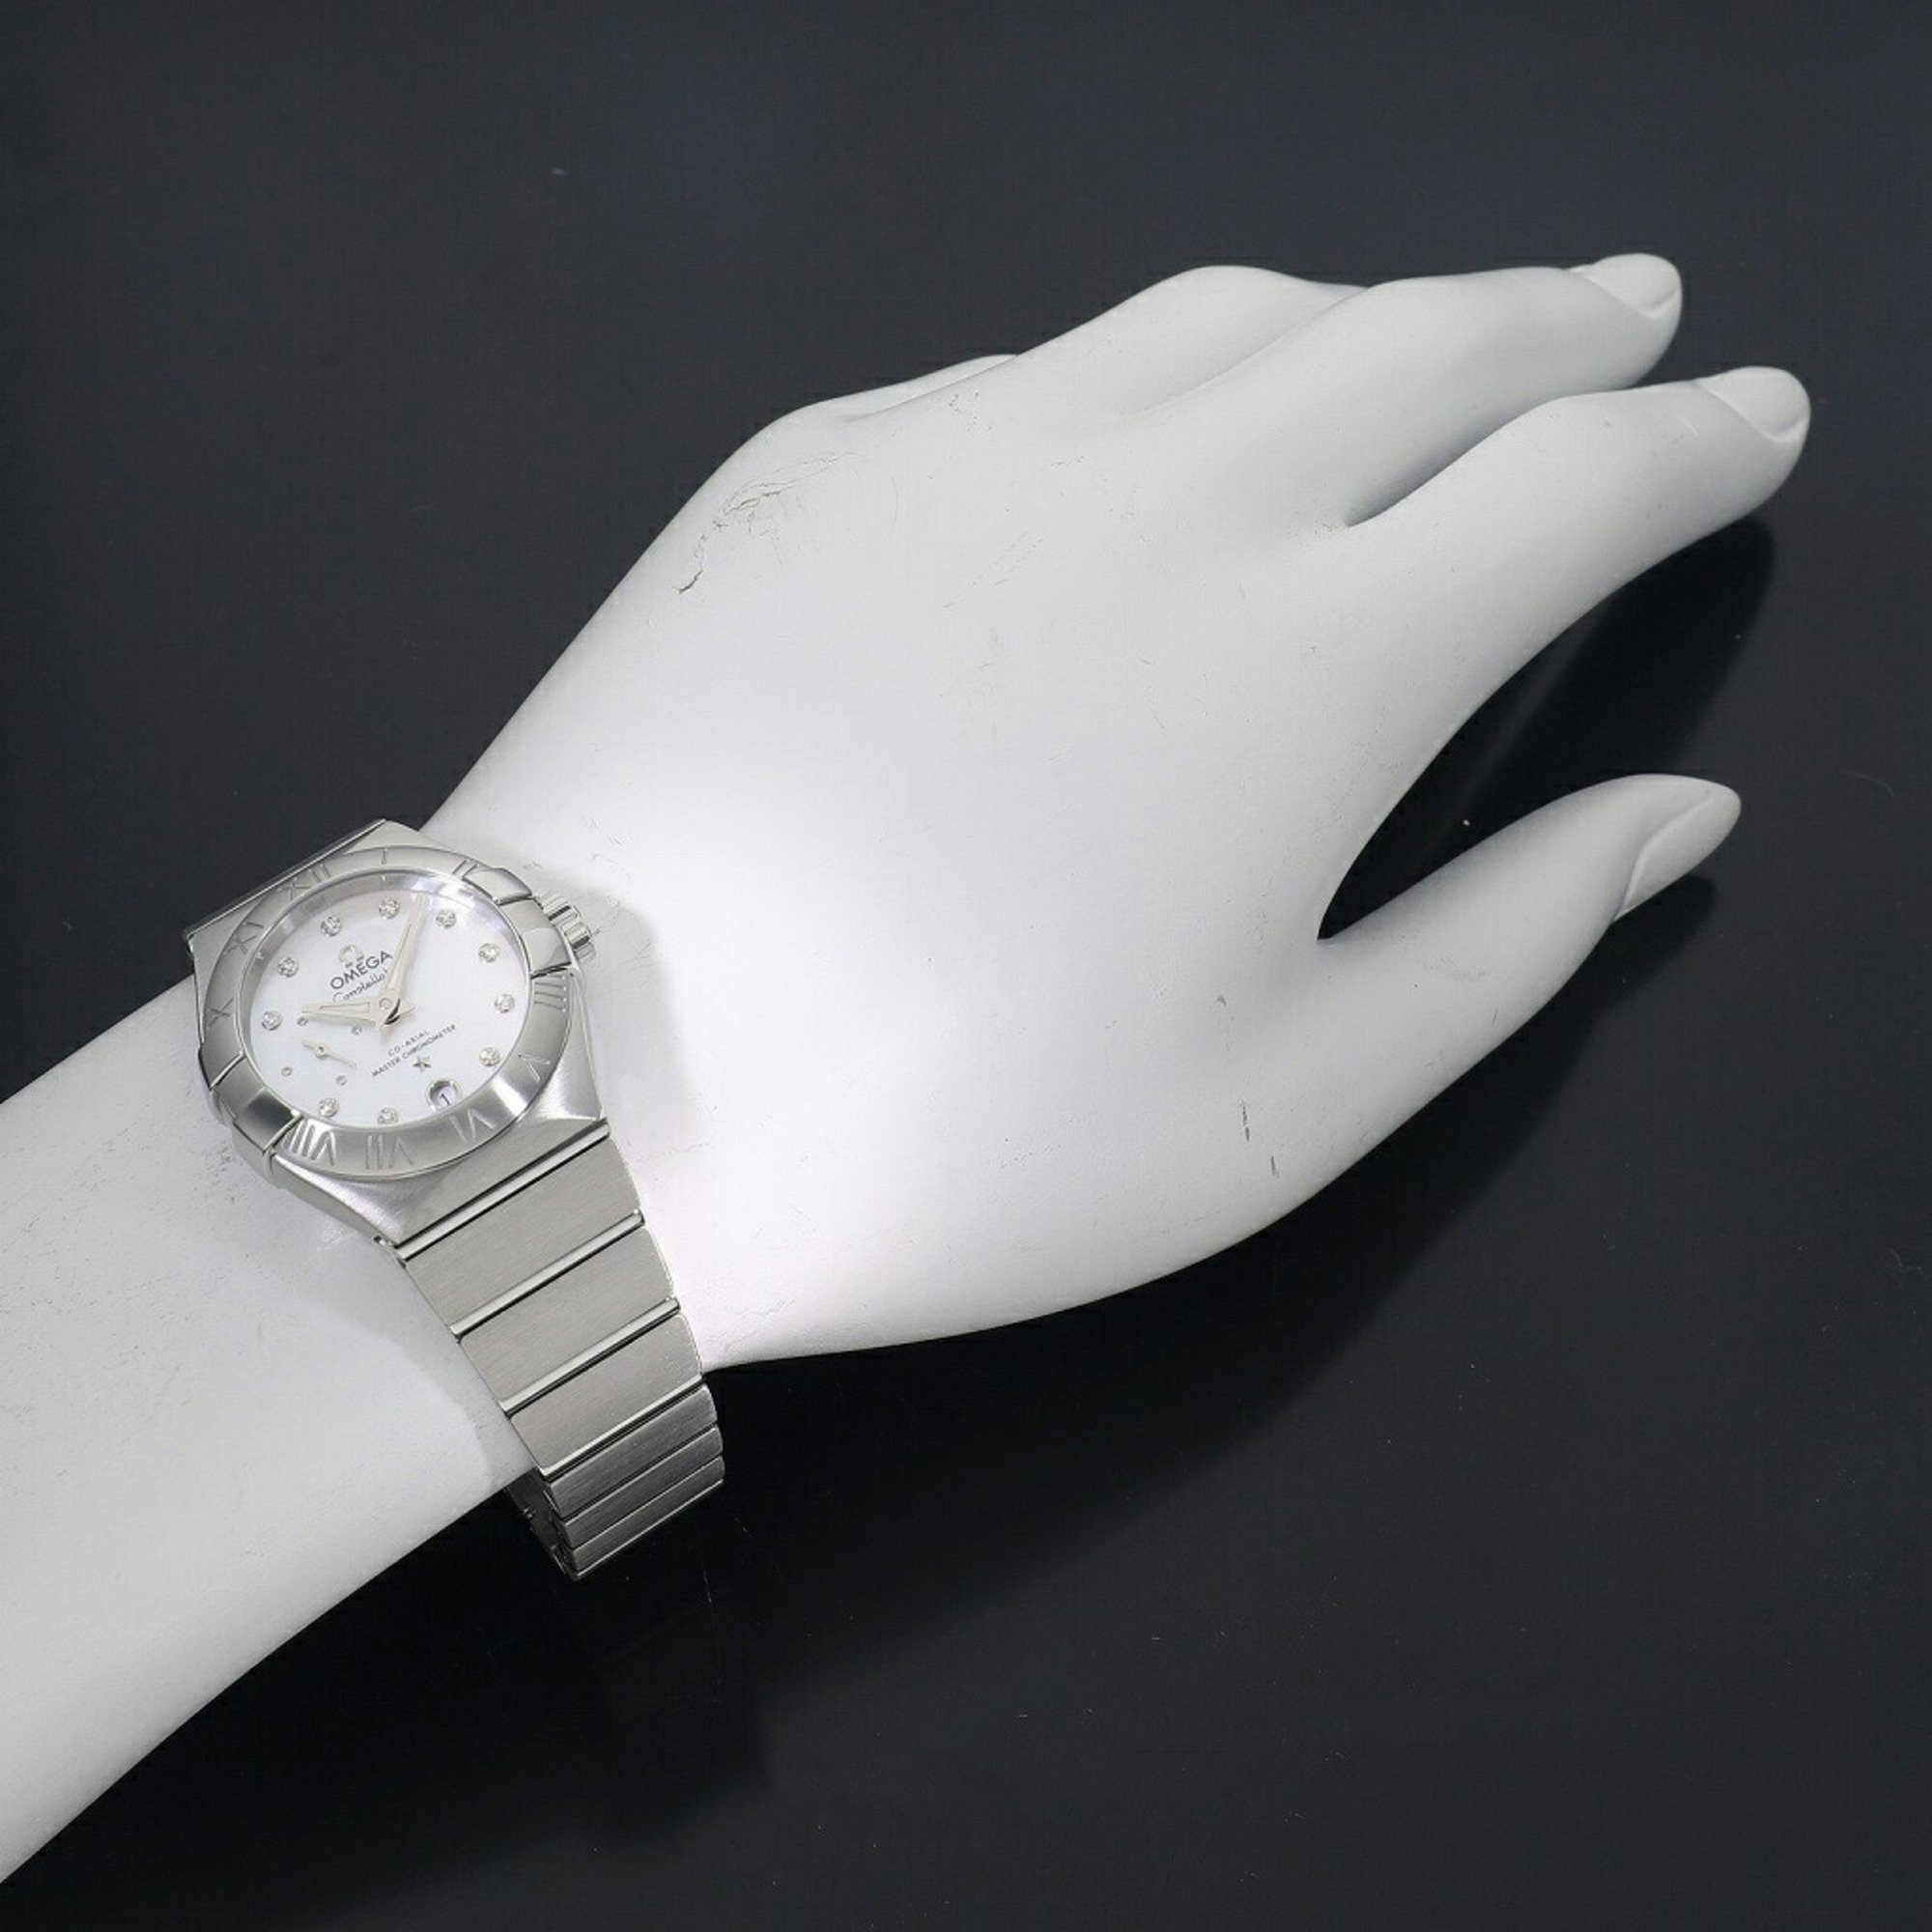 Omega White Shell Diamond Stainless Steel Constellation 127.10.27.20.55.001 Automatic Women's Wristwatch 27 Mm